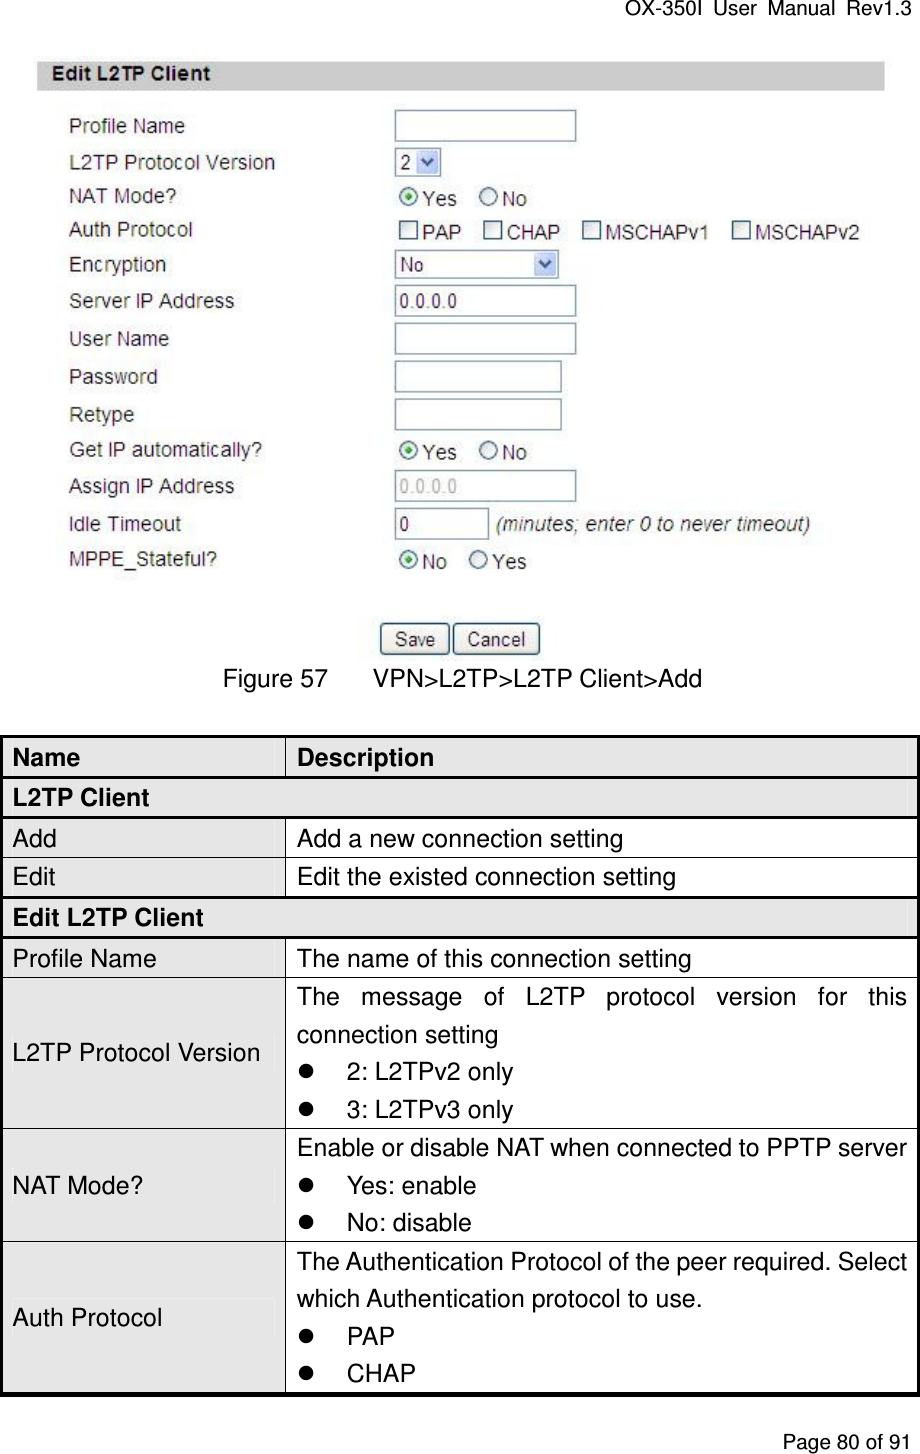 OX-350I  User  Manual  Rev1.3 Page 80 of 91  Figure 57  VPN&gt;L2TP&gt;L2TP Client&gt;Add Name  Description L2TP Client Add  Add a new connection setting Edit  Edit the existed connection setting Edit L2TP Client Profile Name  The name of this connection setting L2TP Protocol Version The  message  of  L2TP  protocol  version  for  this connection setting   2: L2TPv2 only   3: L2TPv3 only   NAT Mode? Enable or disable NAT when connected to PPTP server   Yes: enable   No: disable Auth Protocol The Authentication Protocol of the peer required. Select which Authentication protocol to use.   PAP   CHAP 